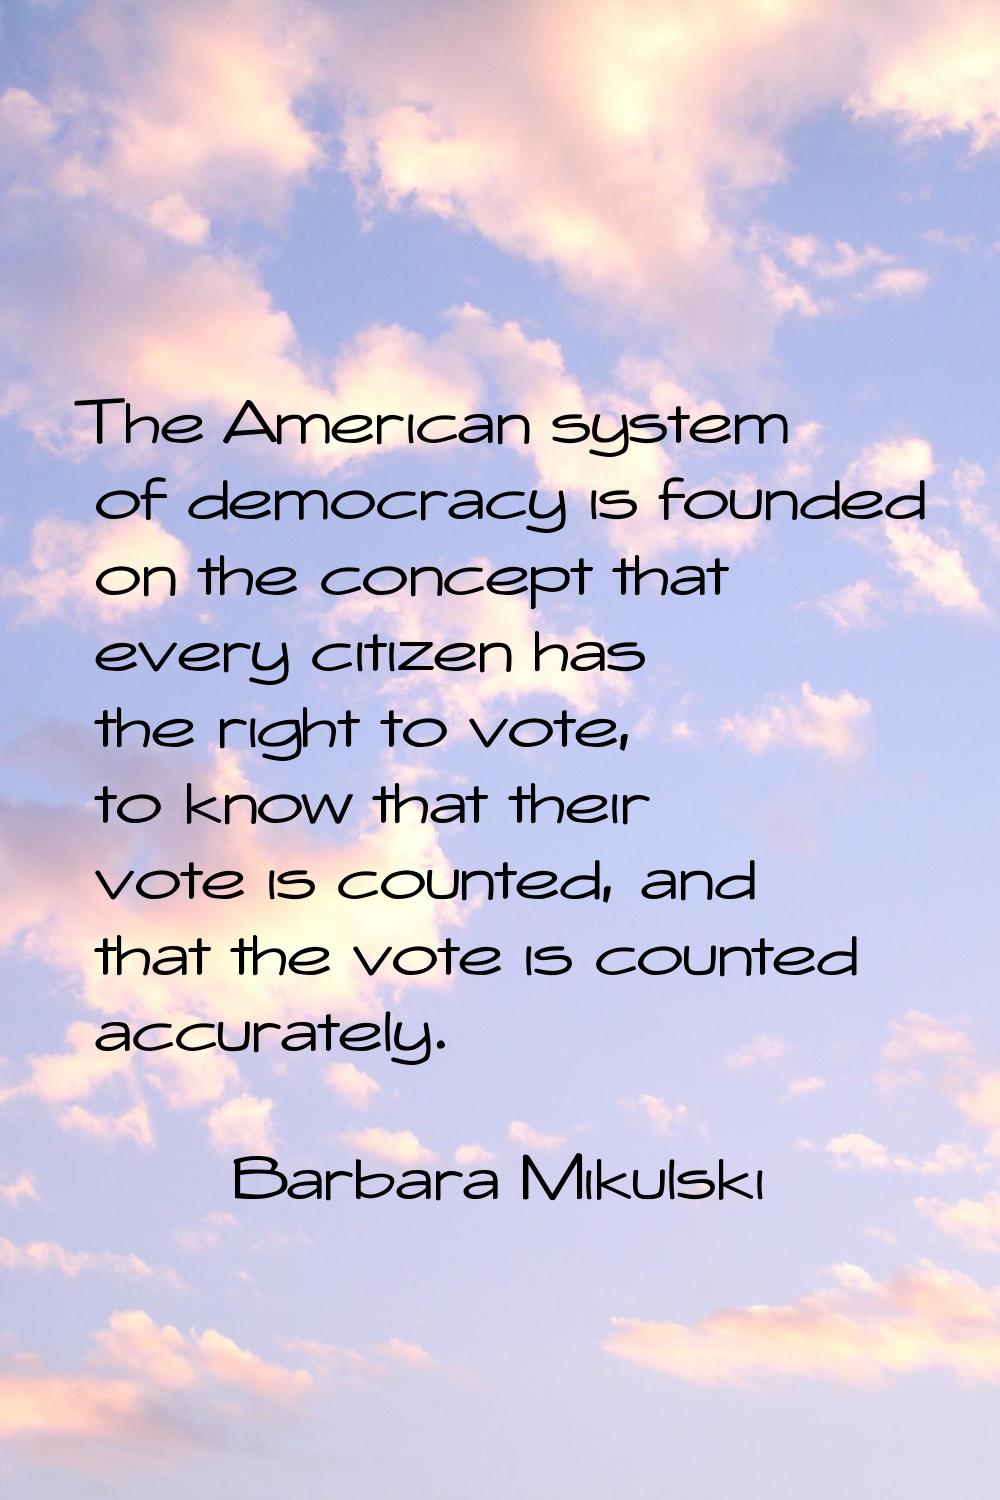 The American system of democracy is founded on the concept that every citizen has the right to vote